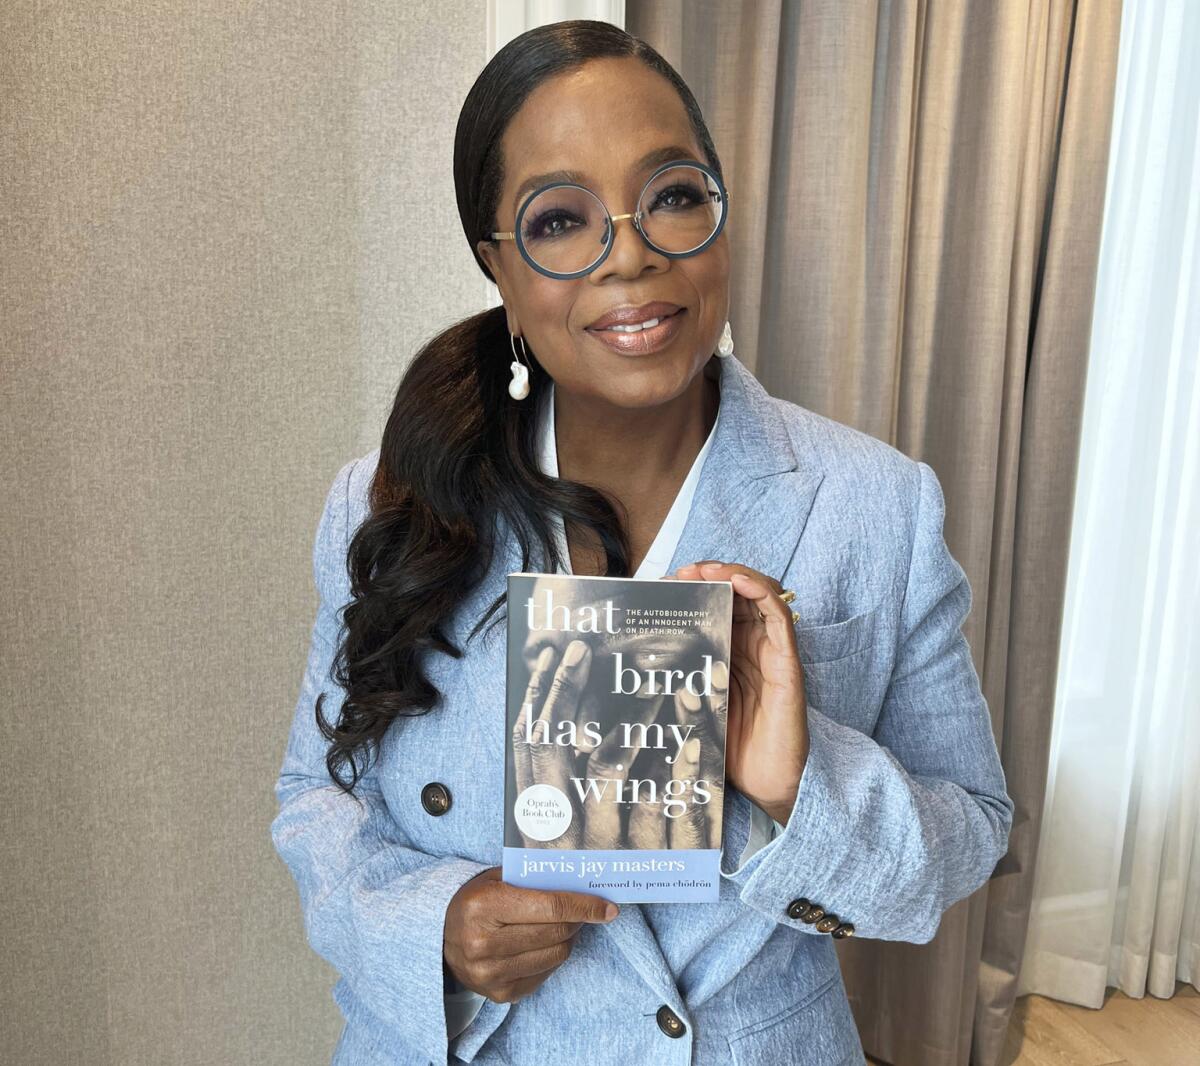 Oprah Winfrey holds up her latest book club selection, "That Bird Has My Wings,"